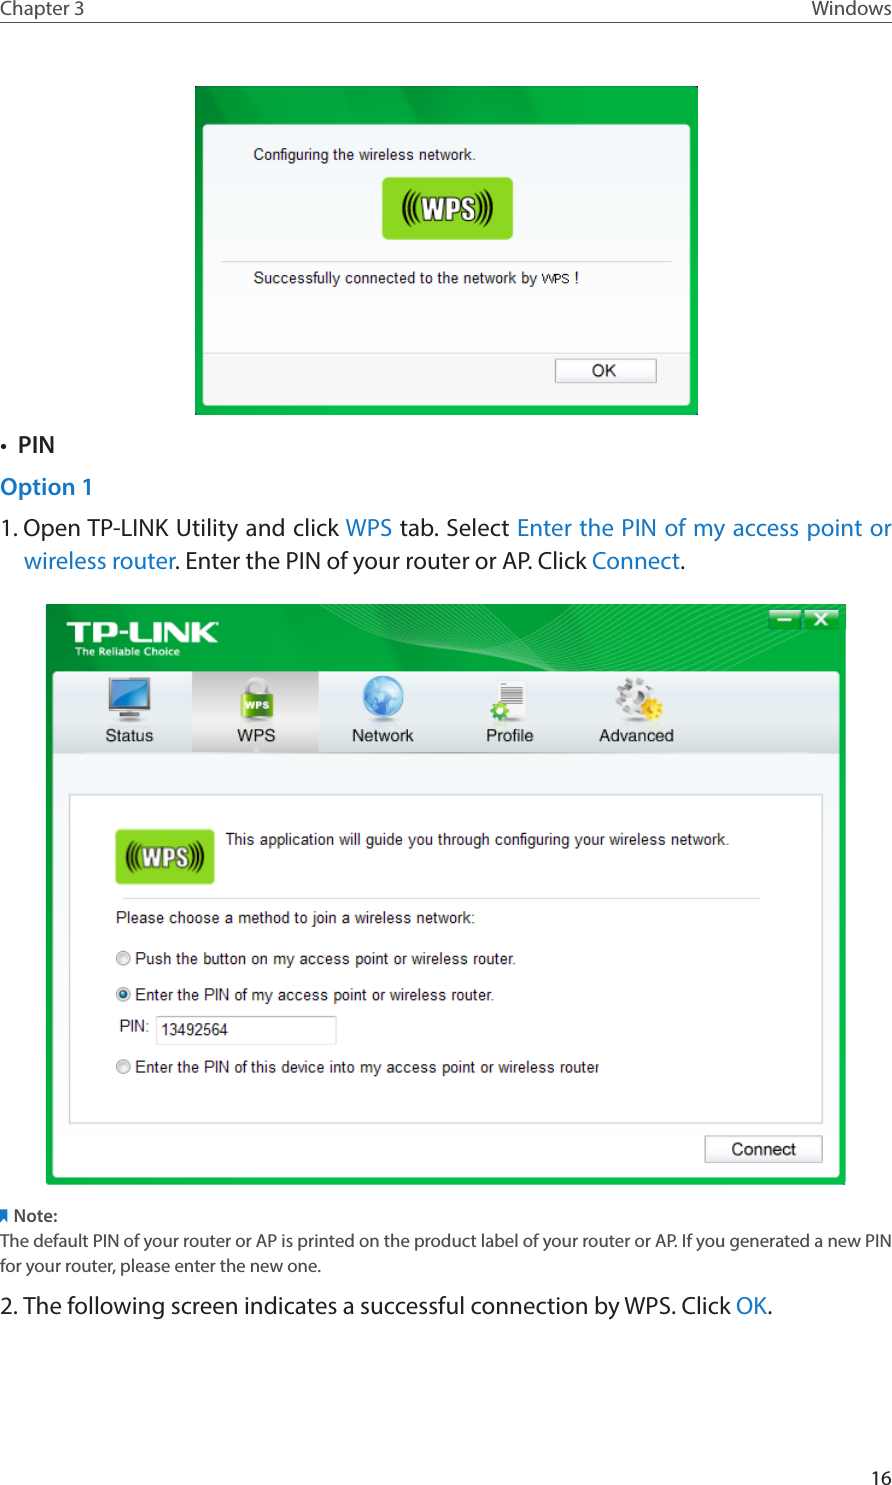 16Chapter 3 Windows•  PINOption 11. Open TP-LINK Utility and click WPS tab. Select Enter the PIN of my access point or wireless router. Enter the PIN of your router or AP. Click Connect.Note:The default PIN of your router or AP is printed on the product label of your router or AP. If you generated a new PIN for your router, please enter the new one. 2. The following screen indicates a successful connection by WPS. Click OK.